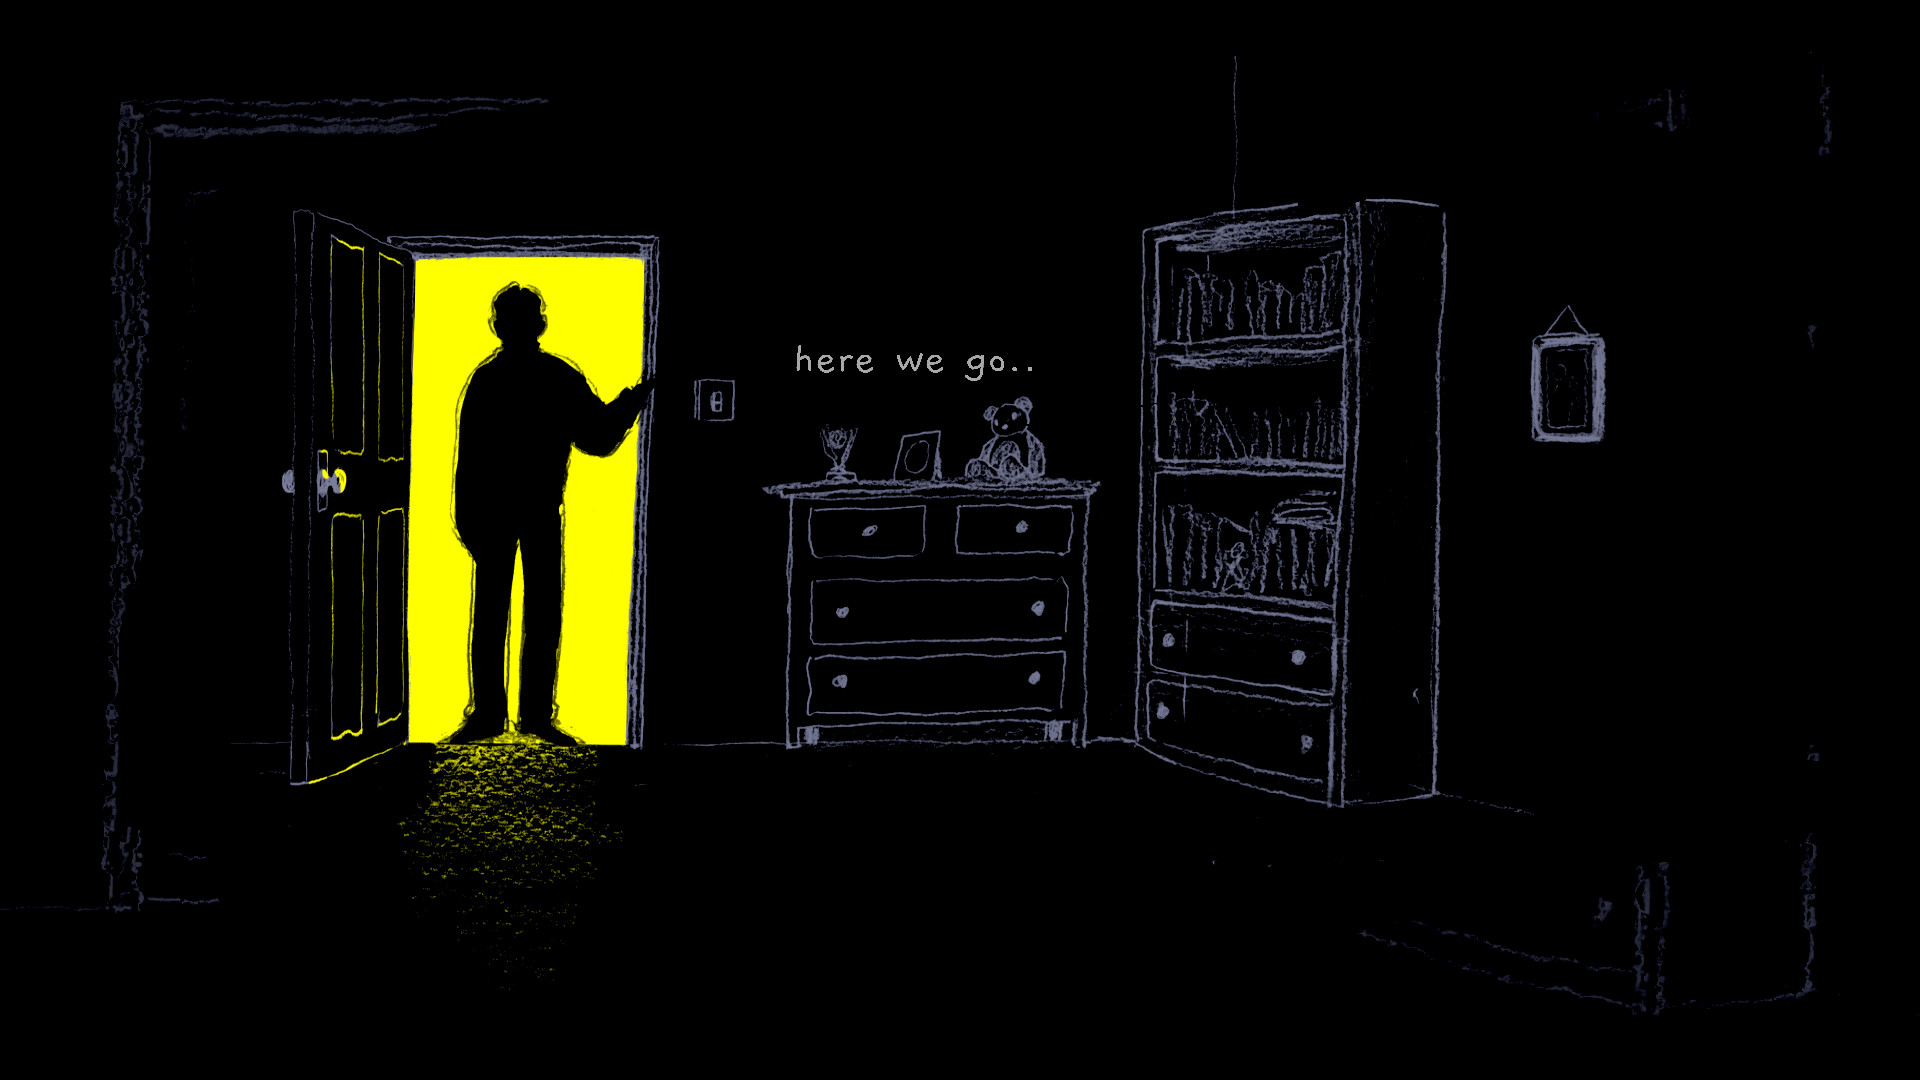 A black room where you can only see the silhouettes of the items in the room with a person standing in the yellow lit doorway saying "here we go.."